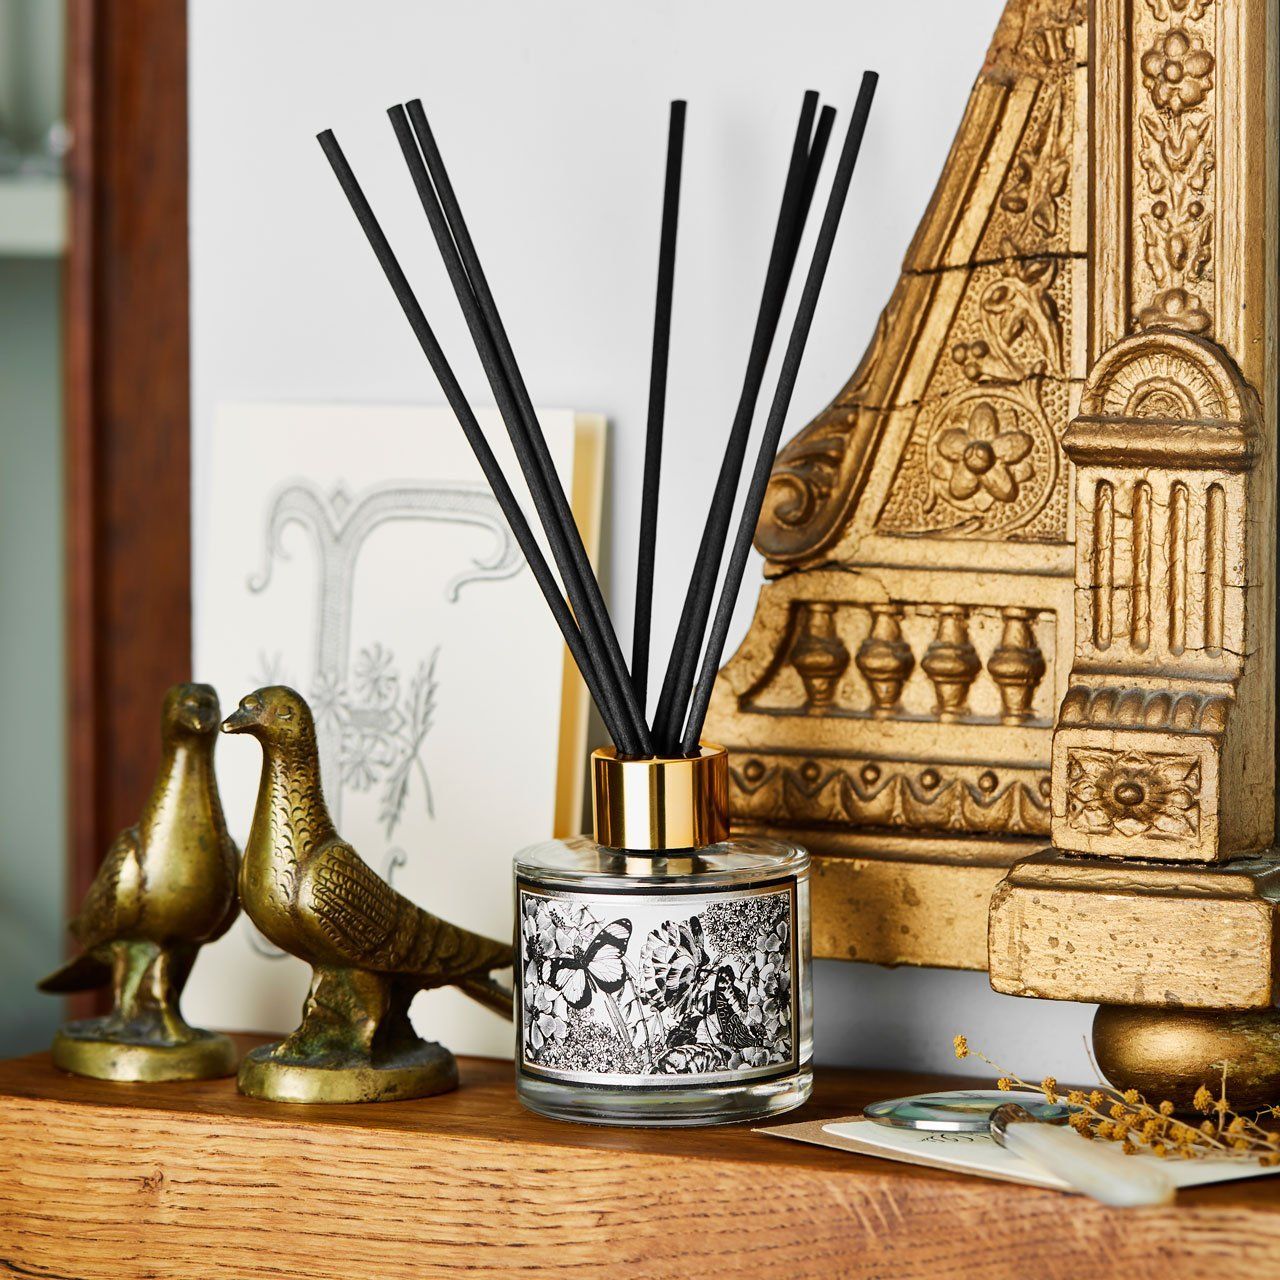 The Country Garden Reed Diffuser - Chase and Wonder - Proudly Made in Britain